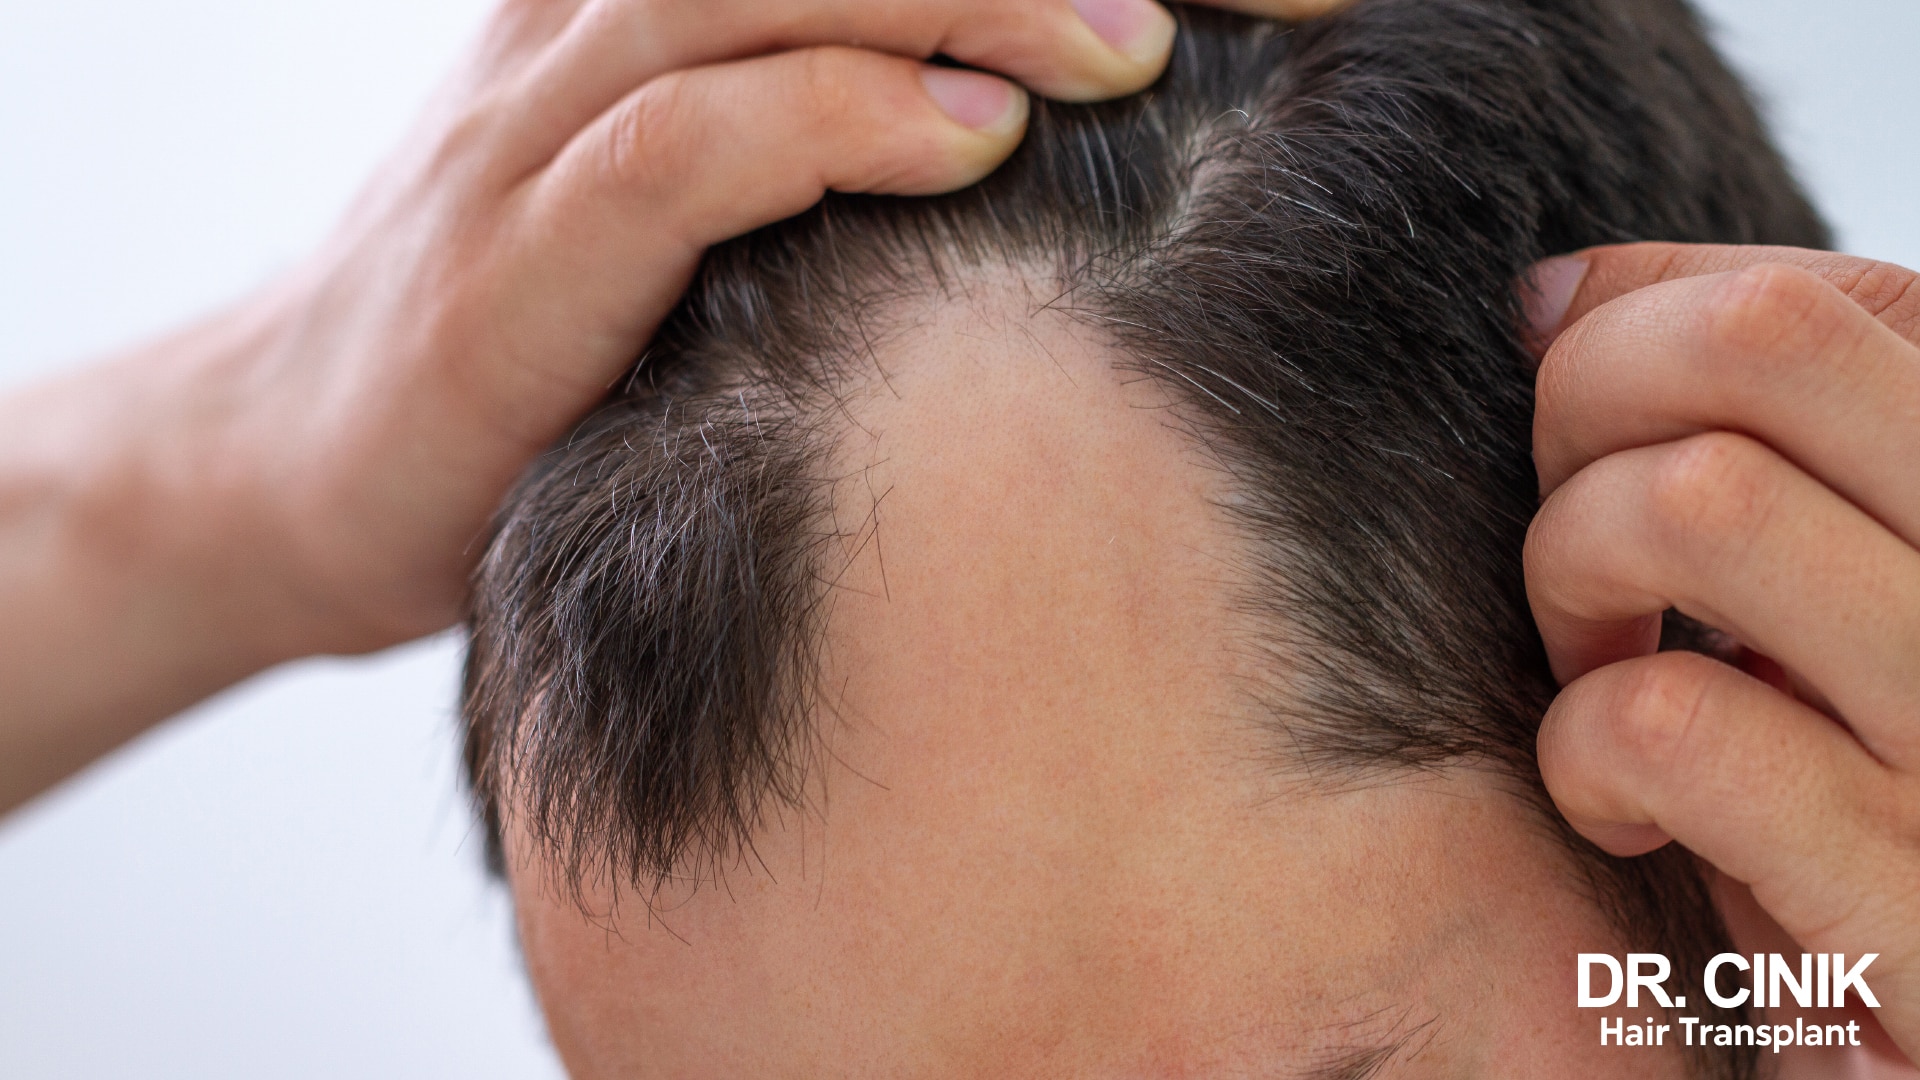 An onset of androgenetic alopecia.